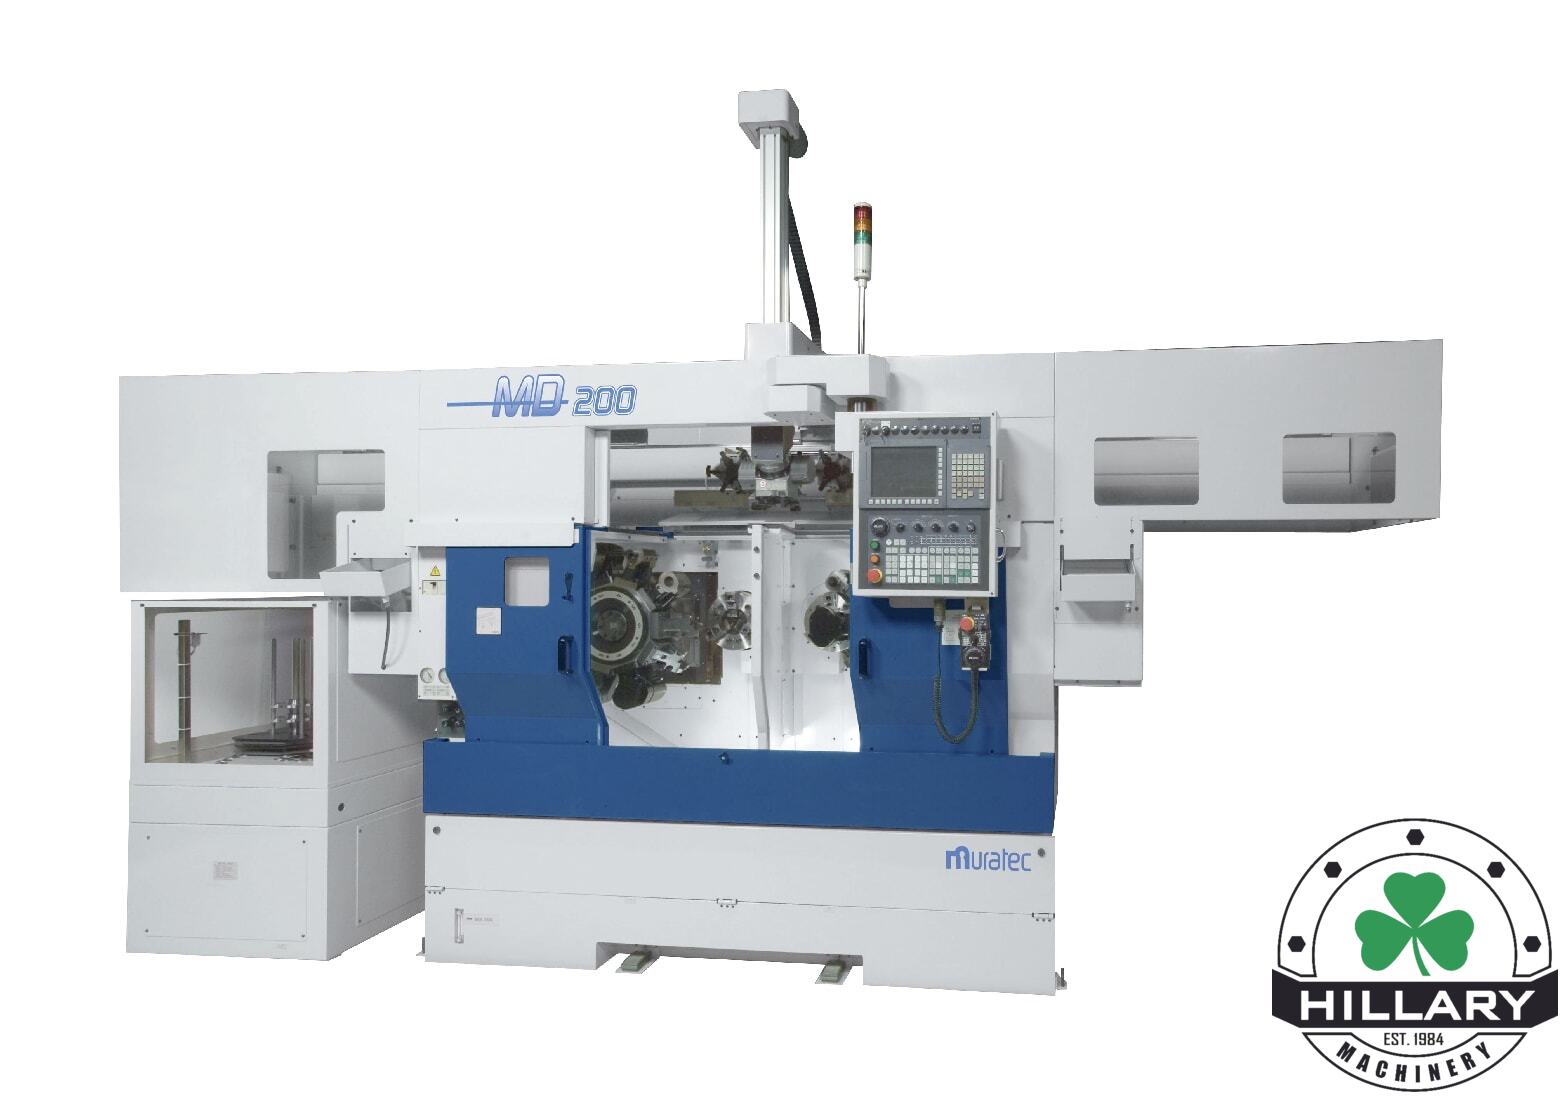 MURATEC MD200 Automated Turning Centers | Hillary Machinery